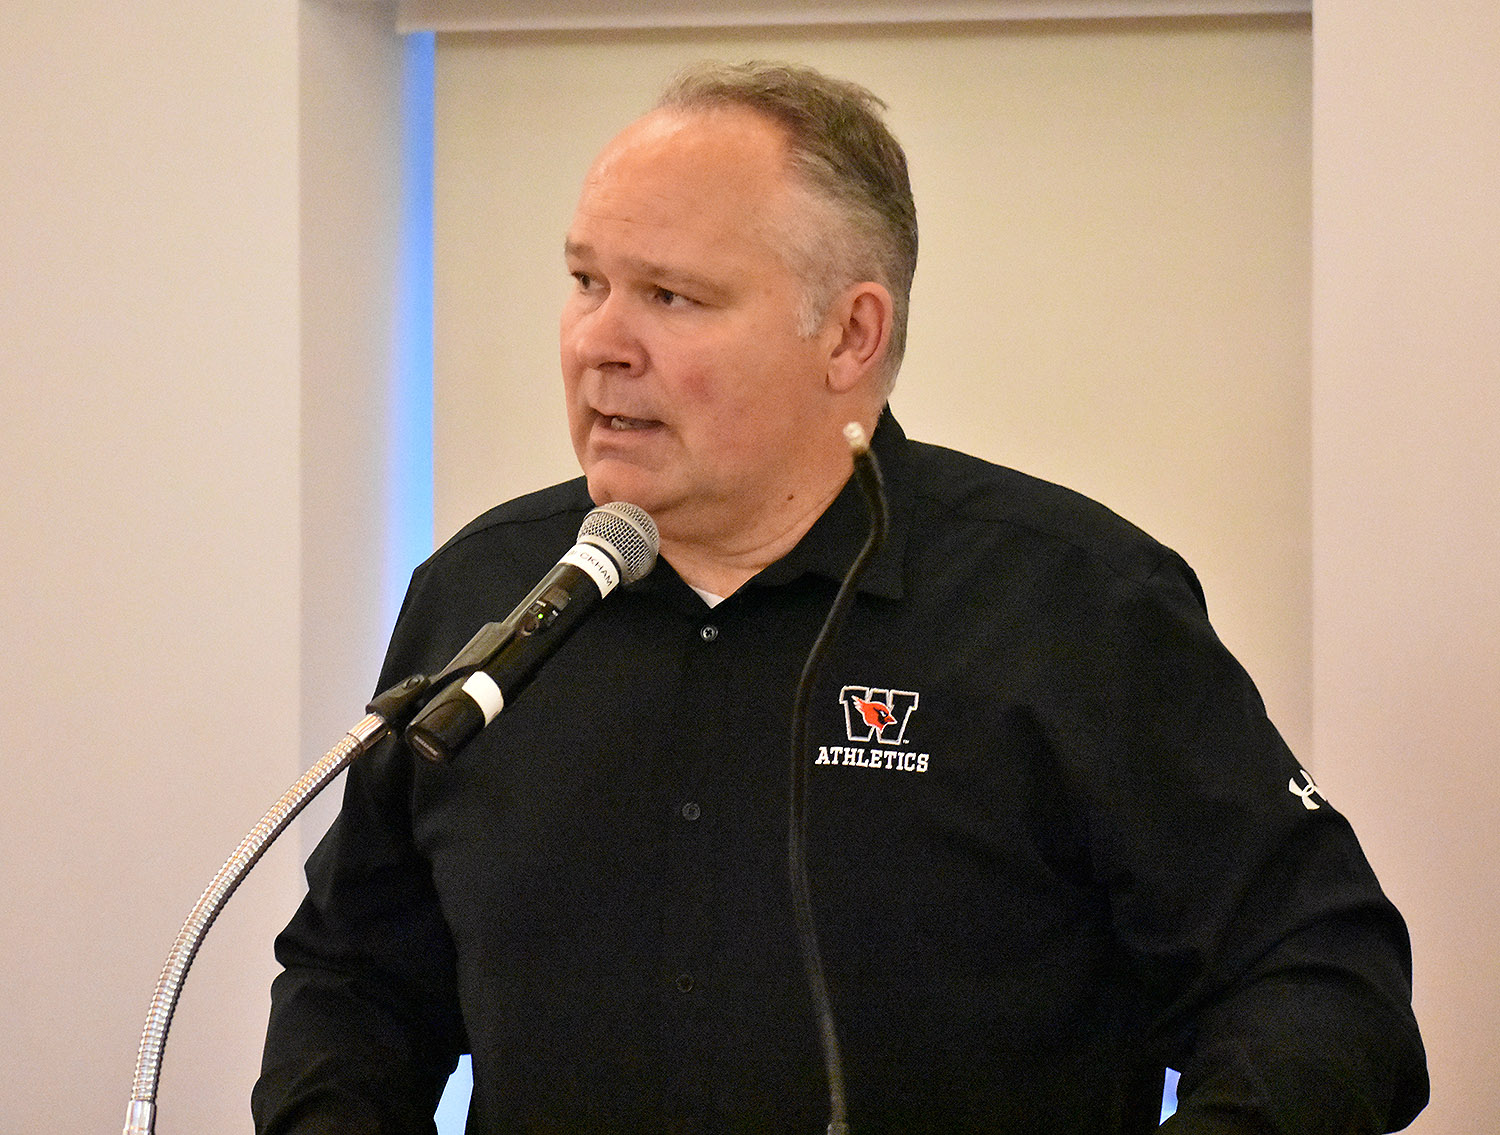 Whalen served as master of ceremonies at the event.